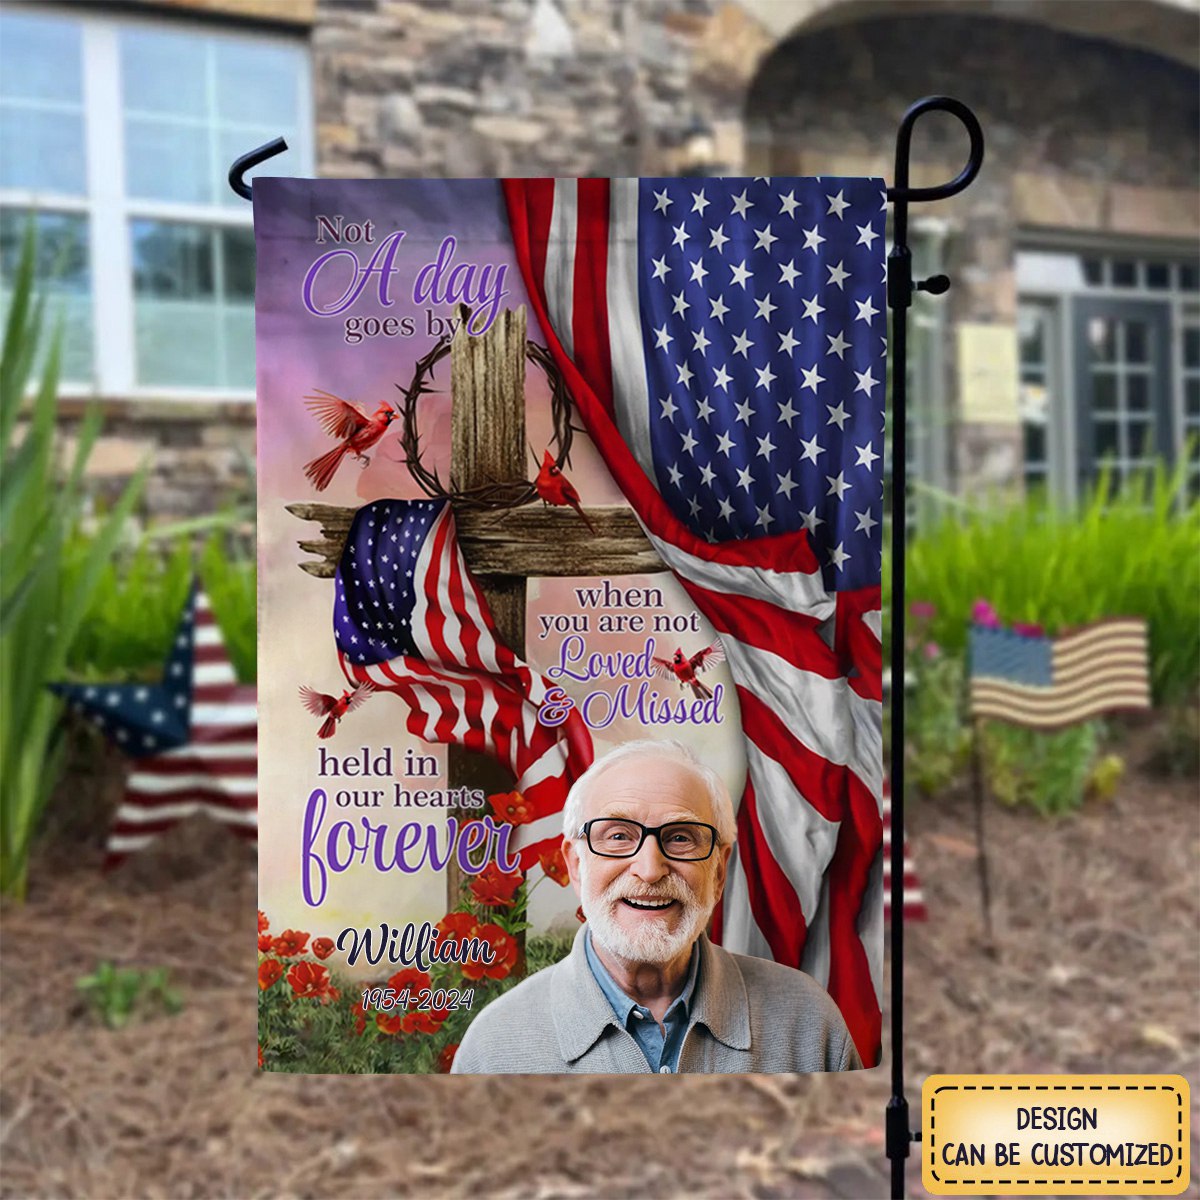 Not A Day Goes By When You Are Not Loved And Missed - Personalized Garden Flag